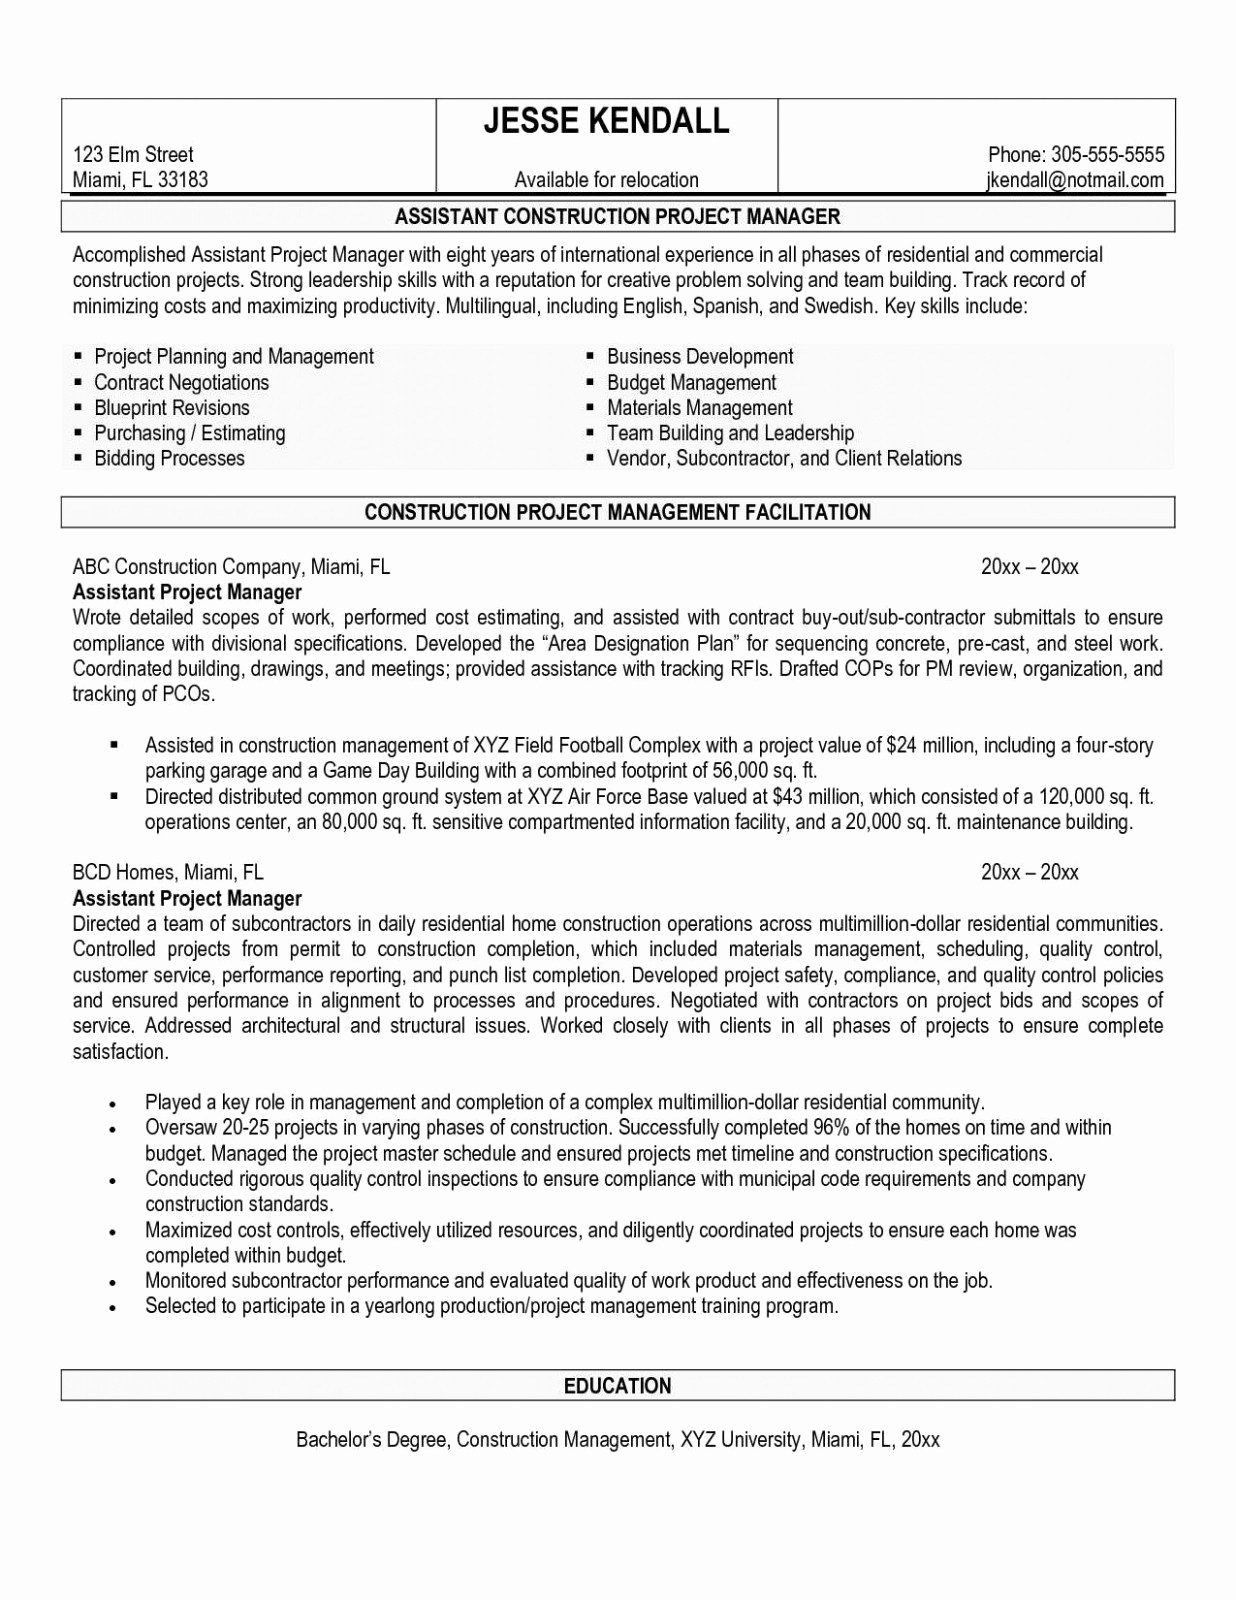 Sample Resume for assistant Project Manager Construction assistant Manager Resume Sample Inspirational Project Manager …